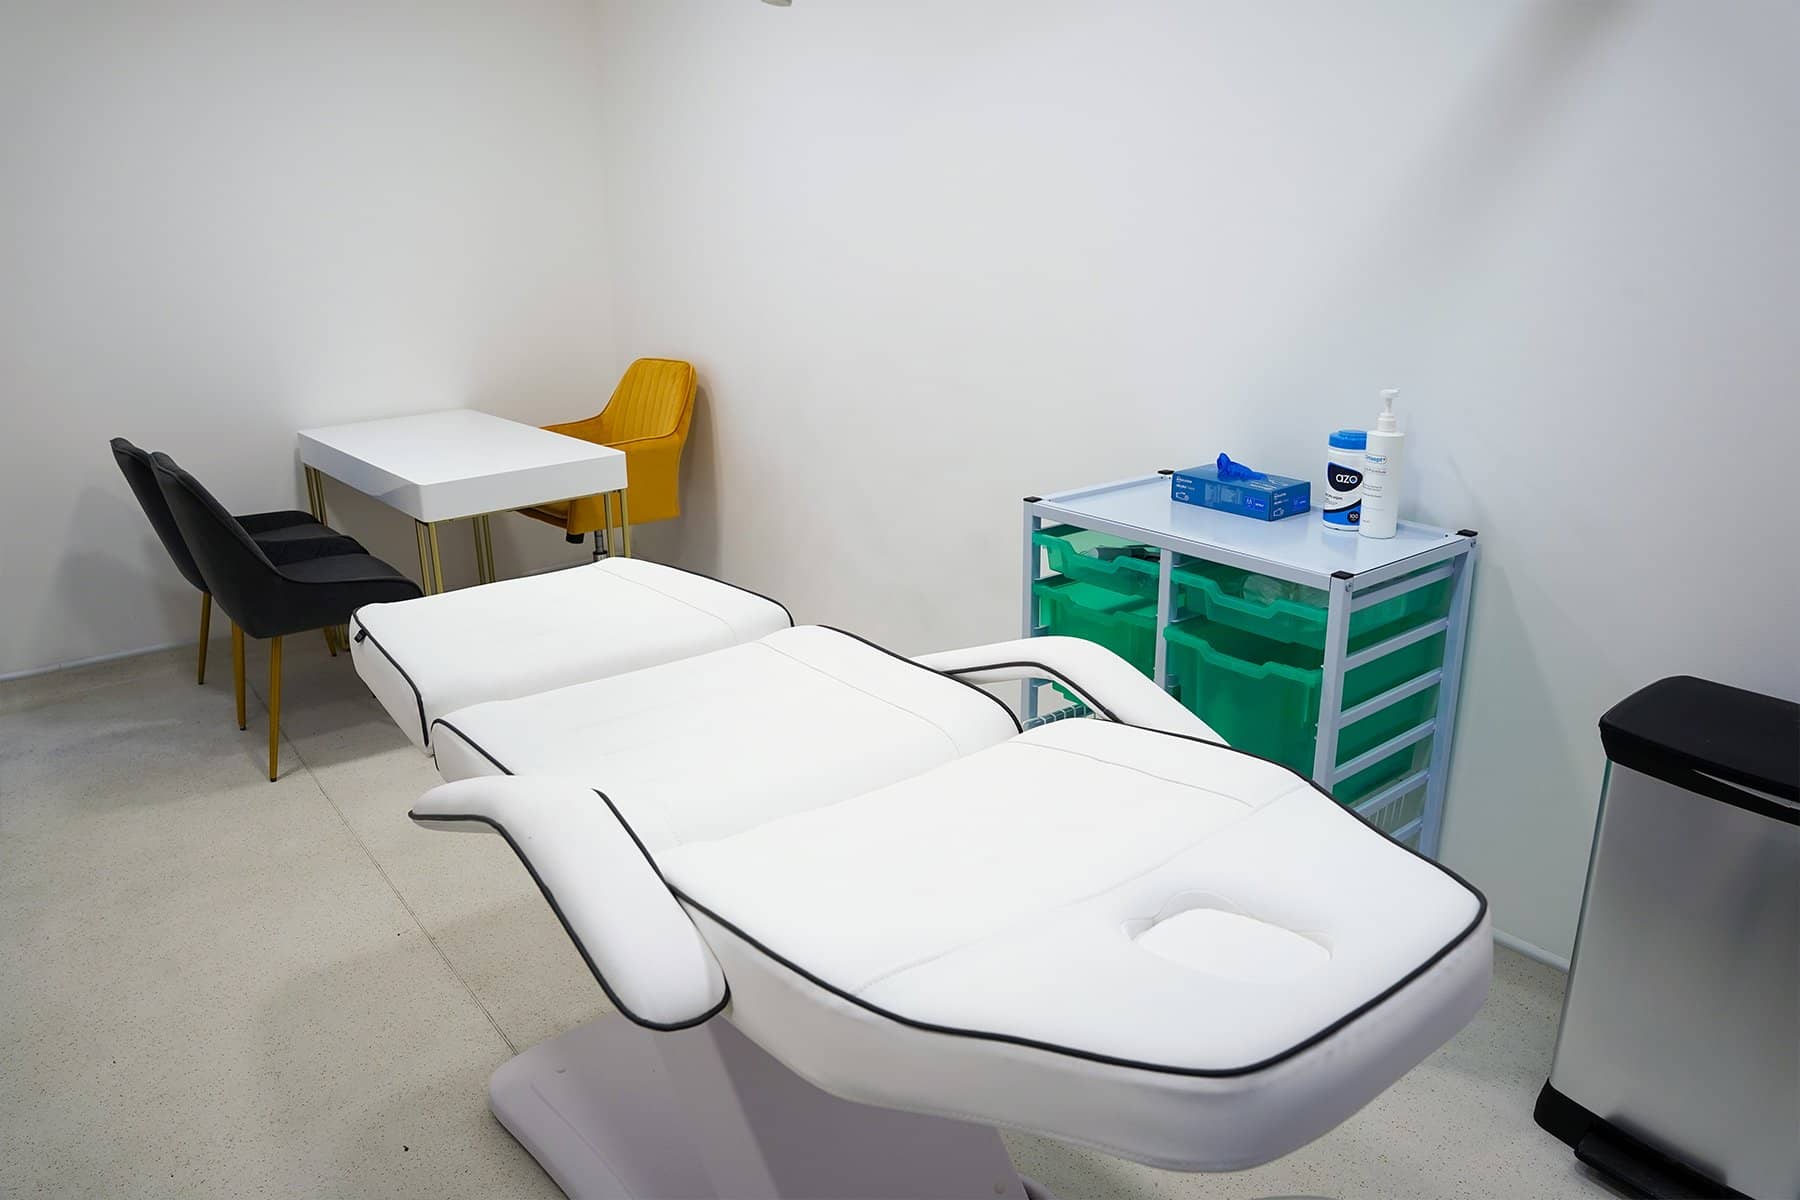 London Therapy Room Rental